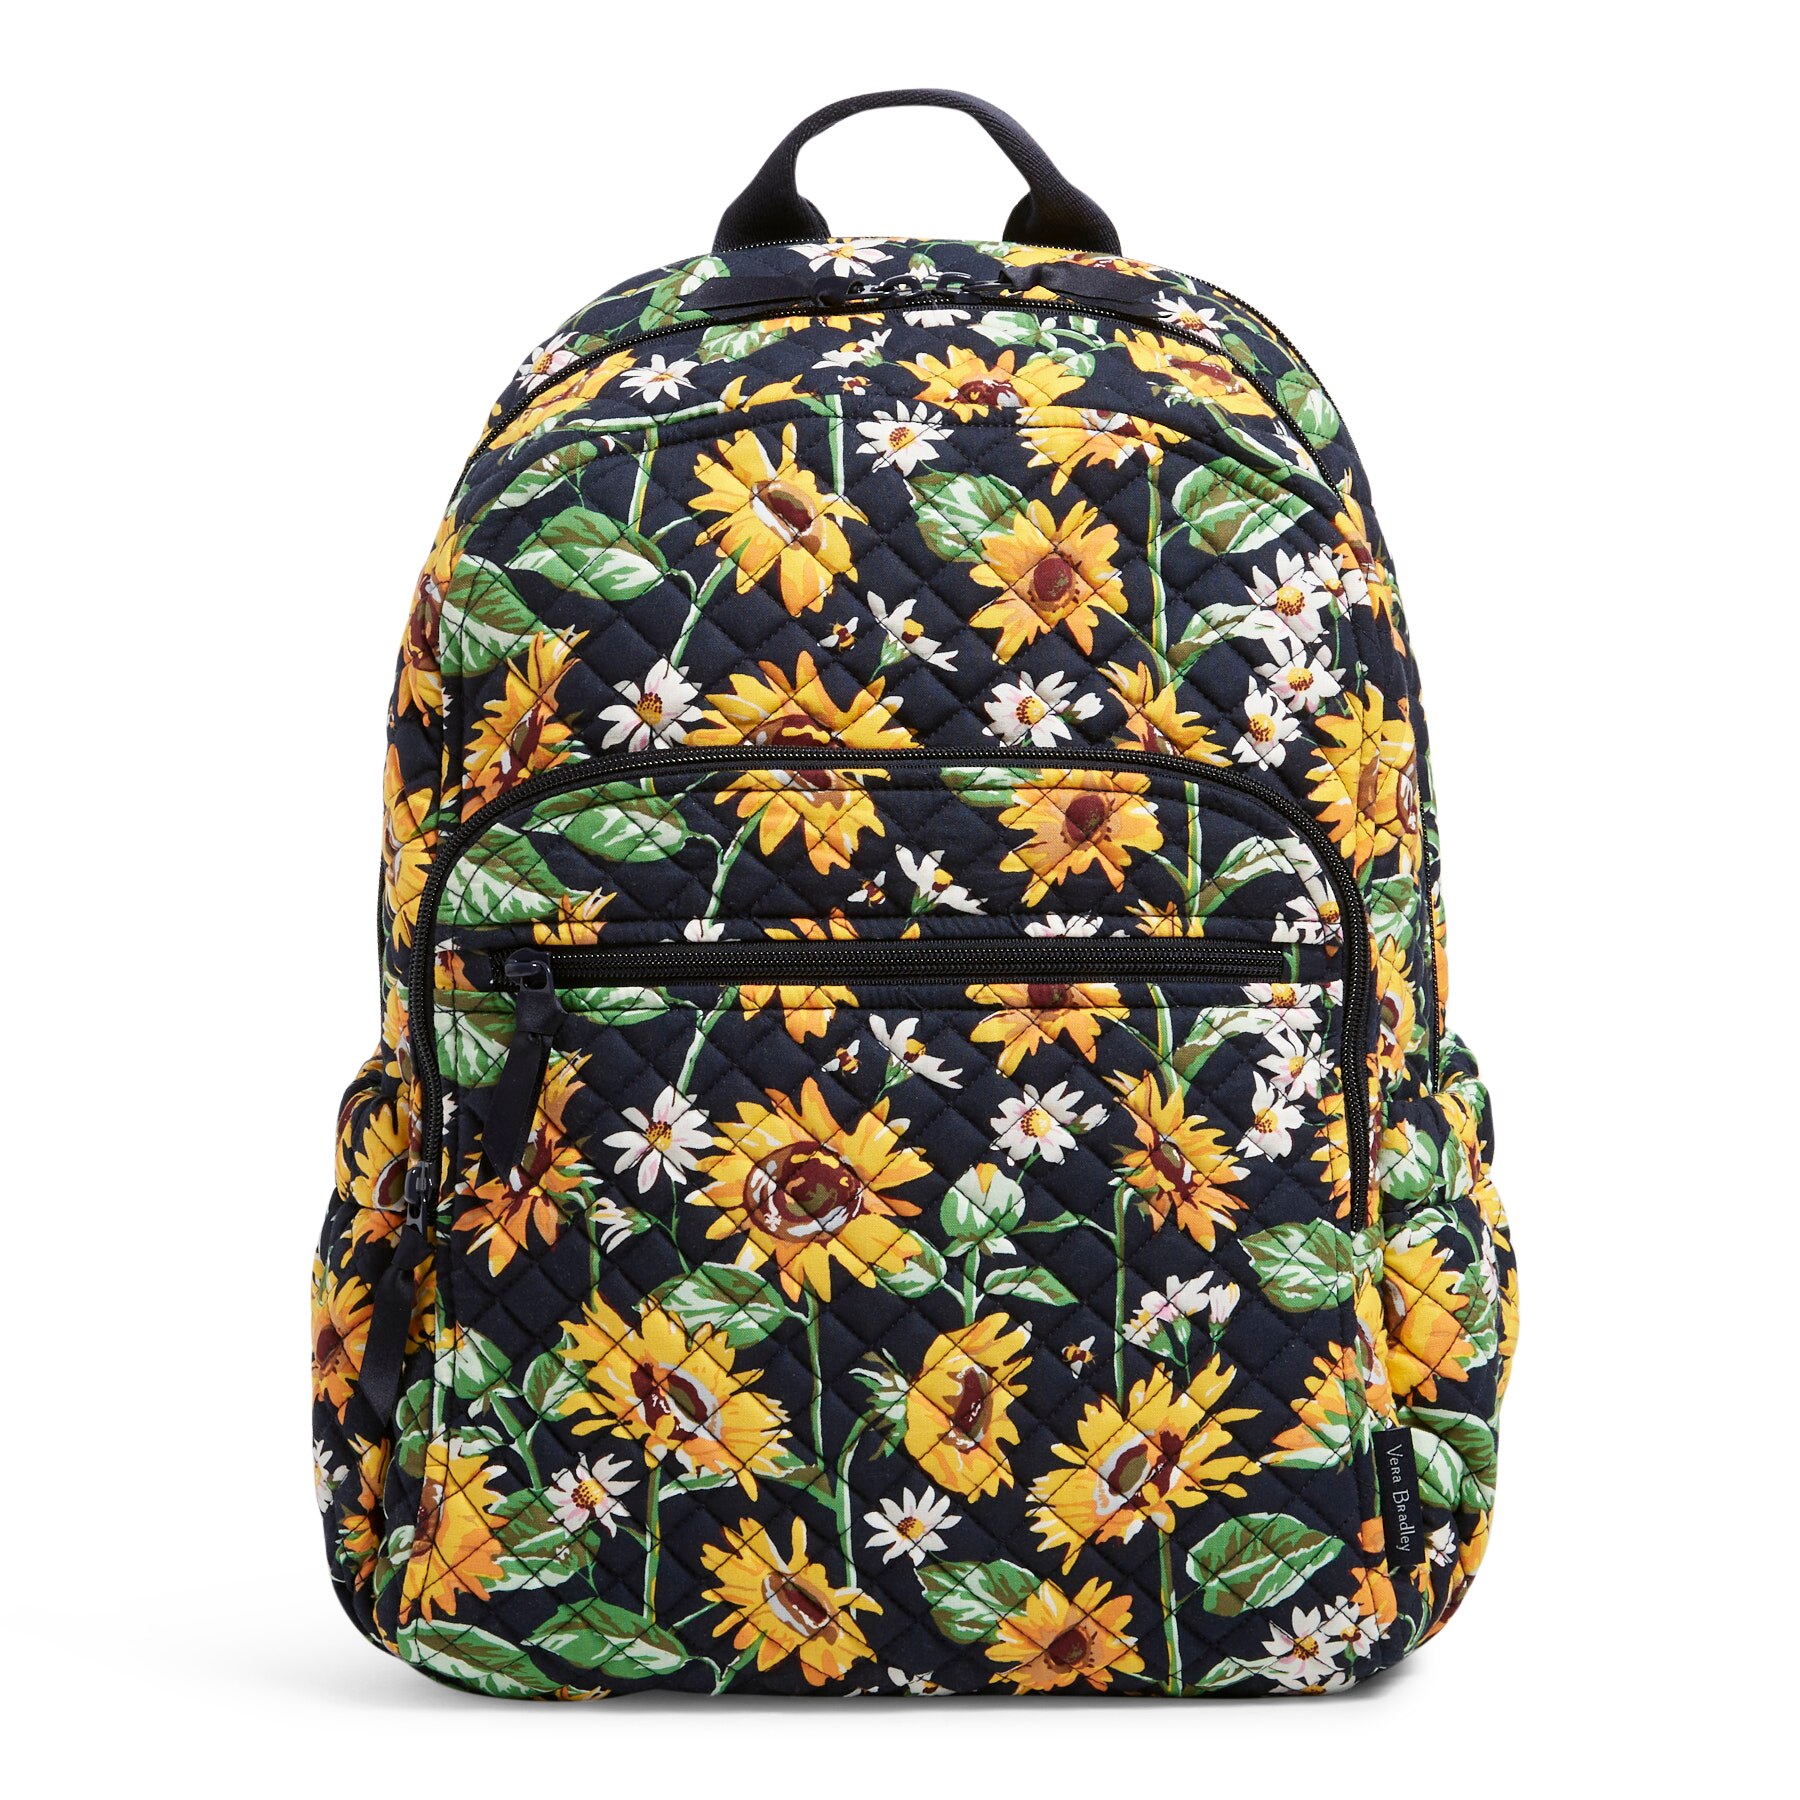 Campus Backpack Sunflowers